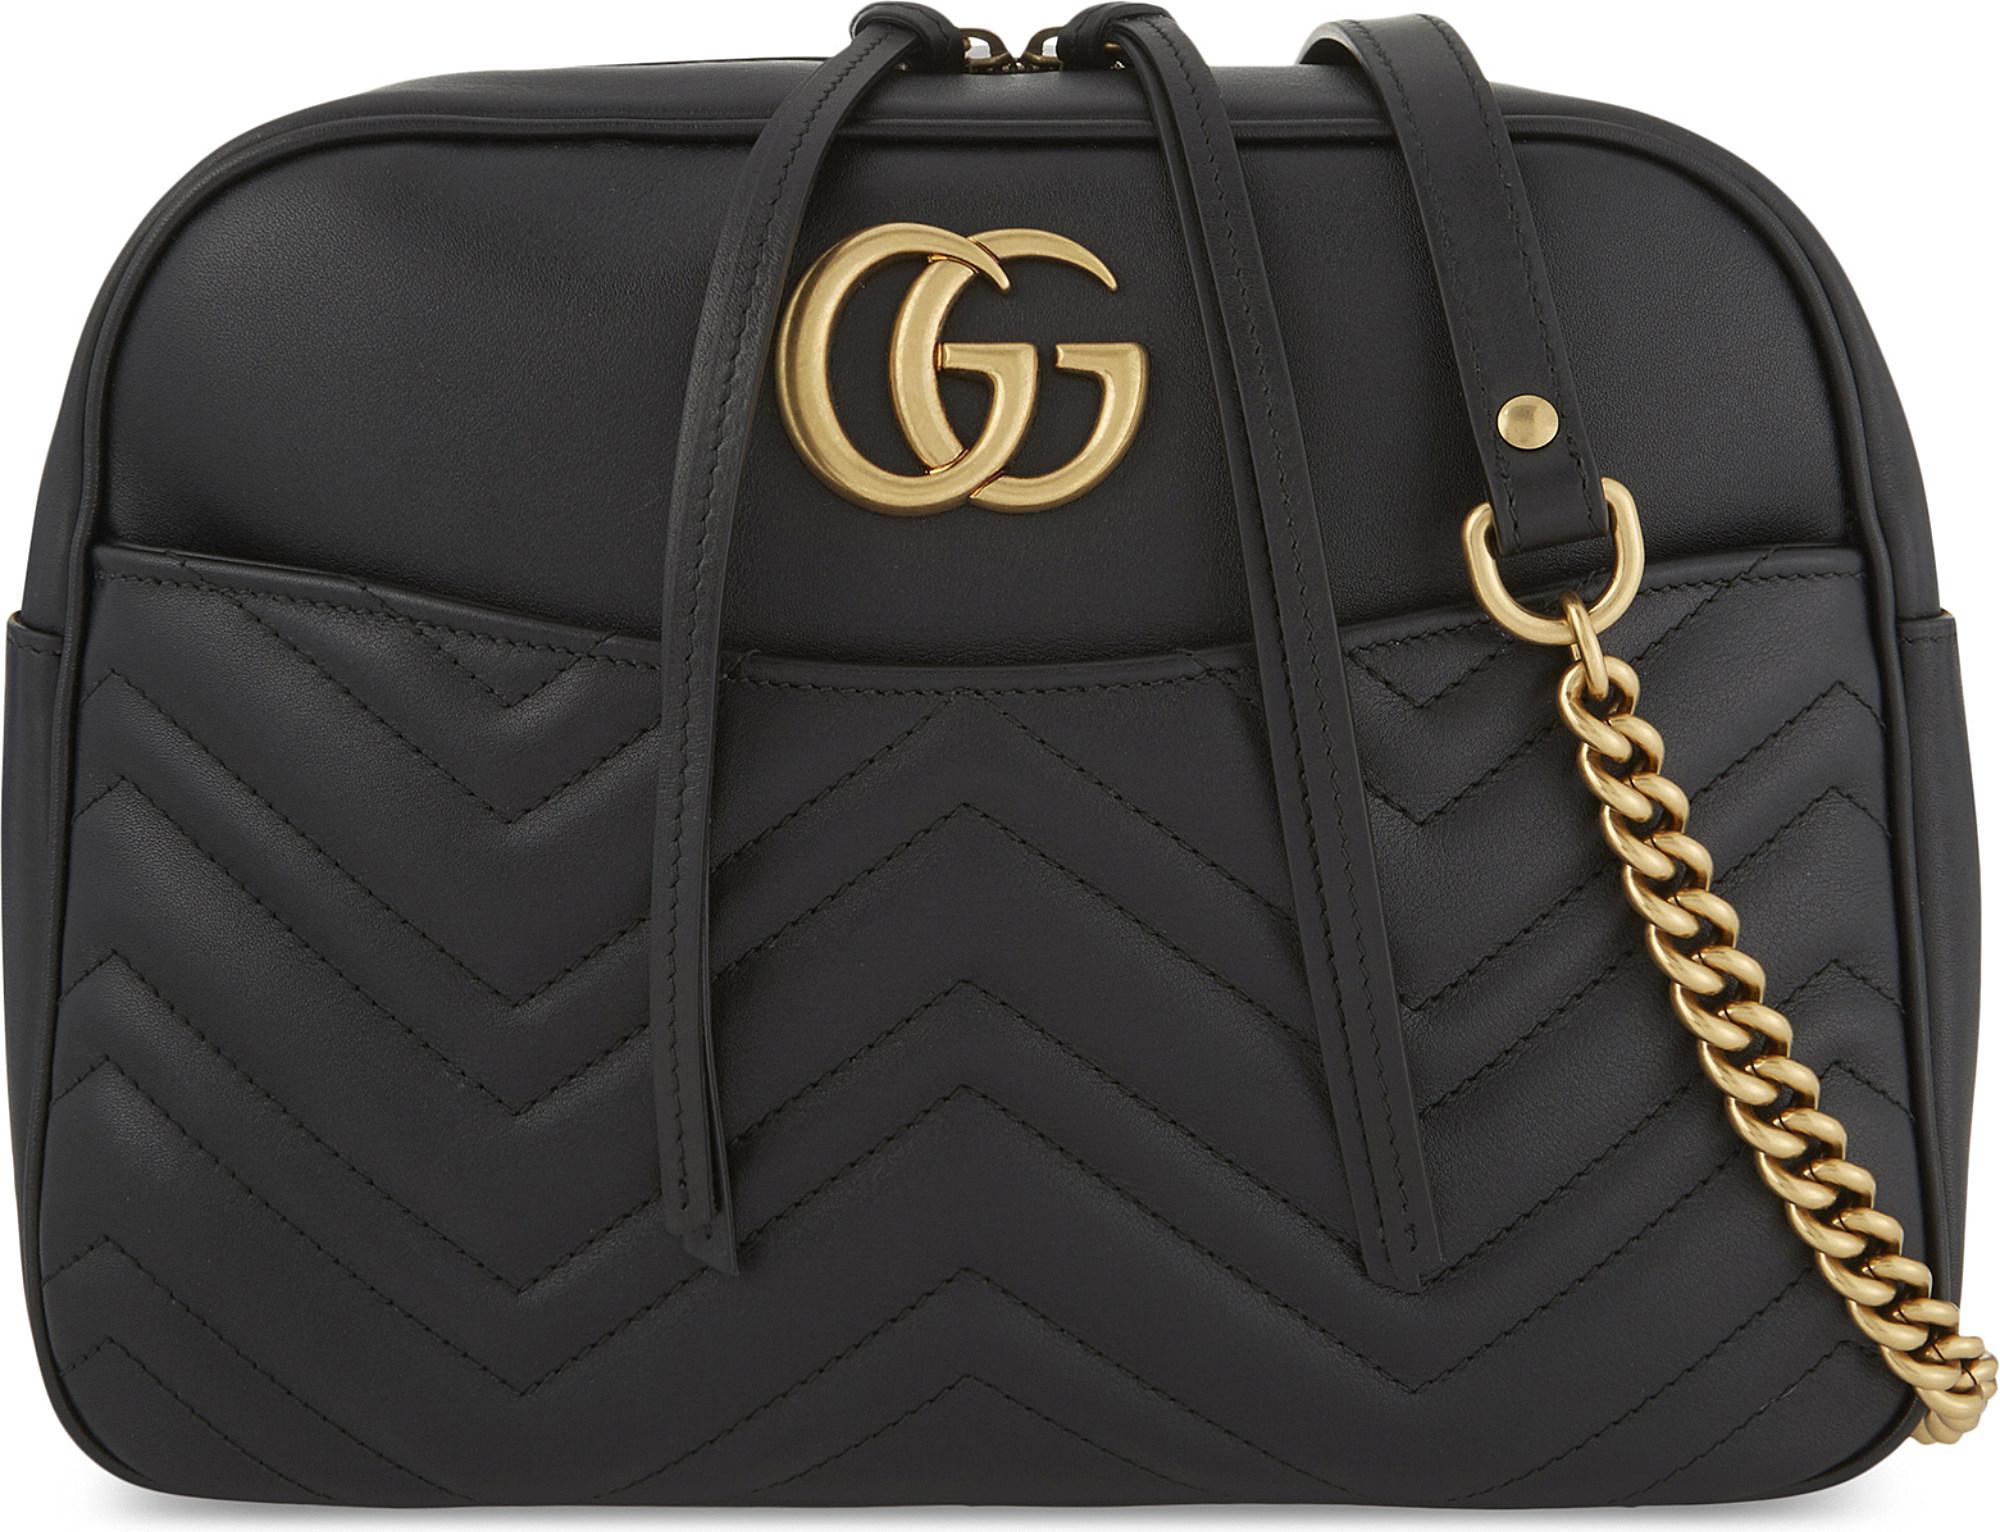 Gucci GG Marmont Medium Quilted Leather Shoulder Bag in Black - Lyst